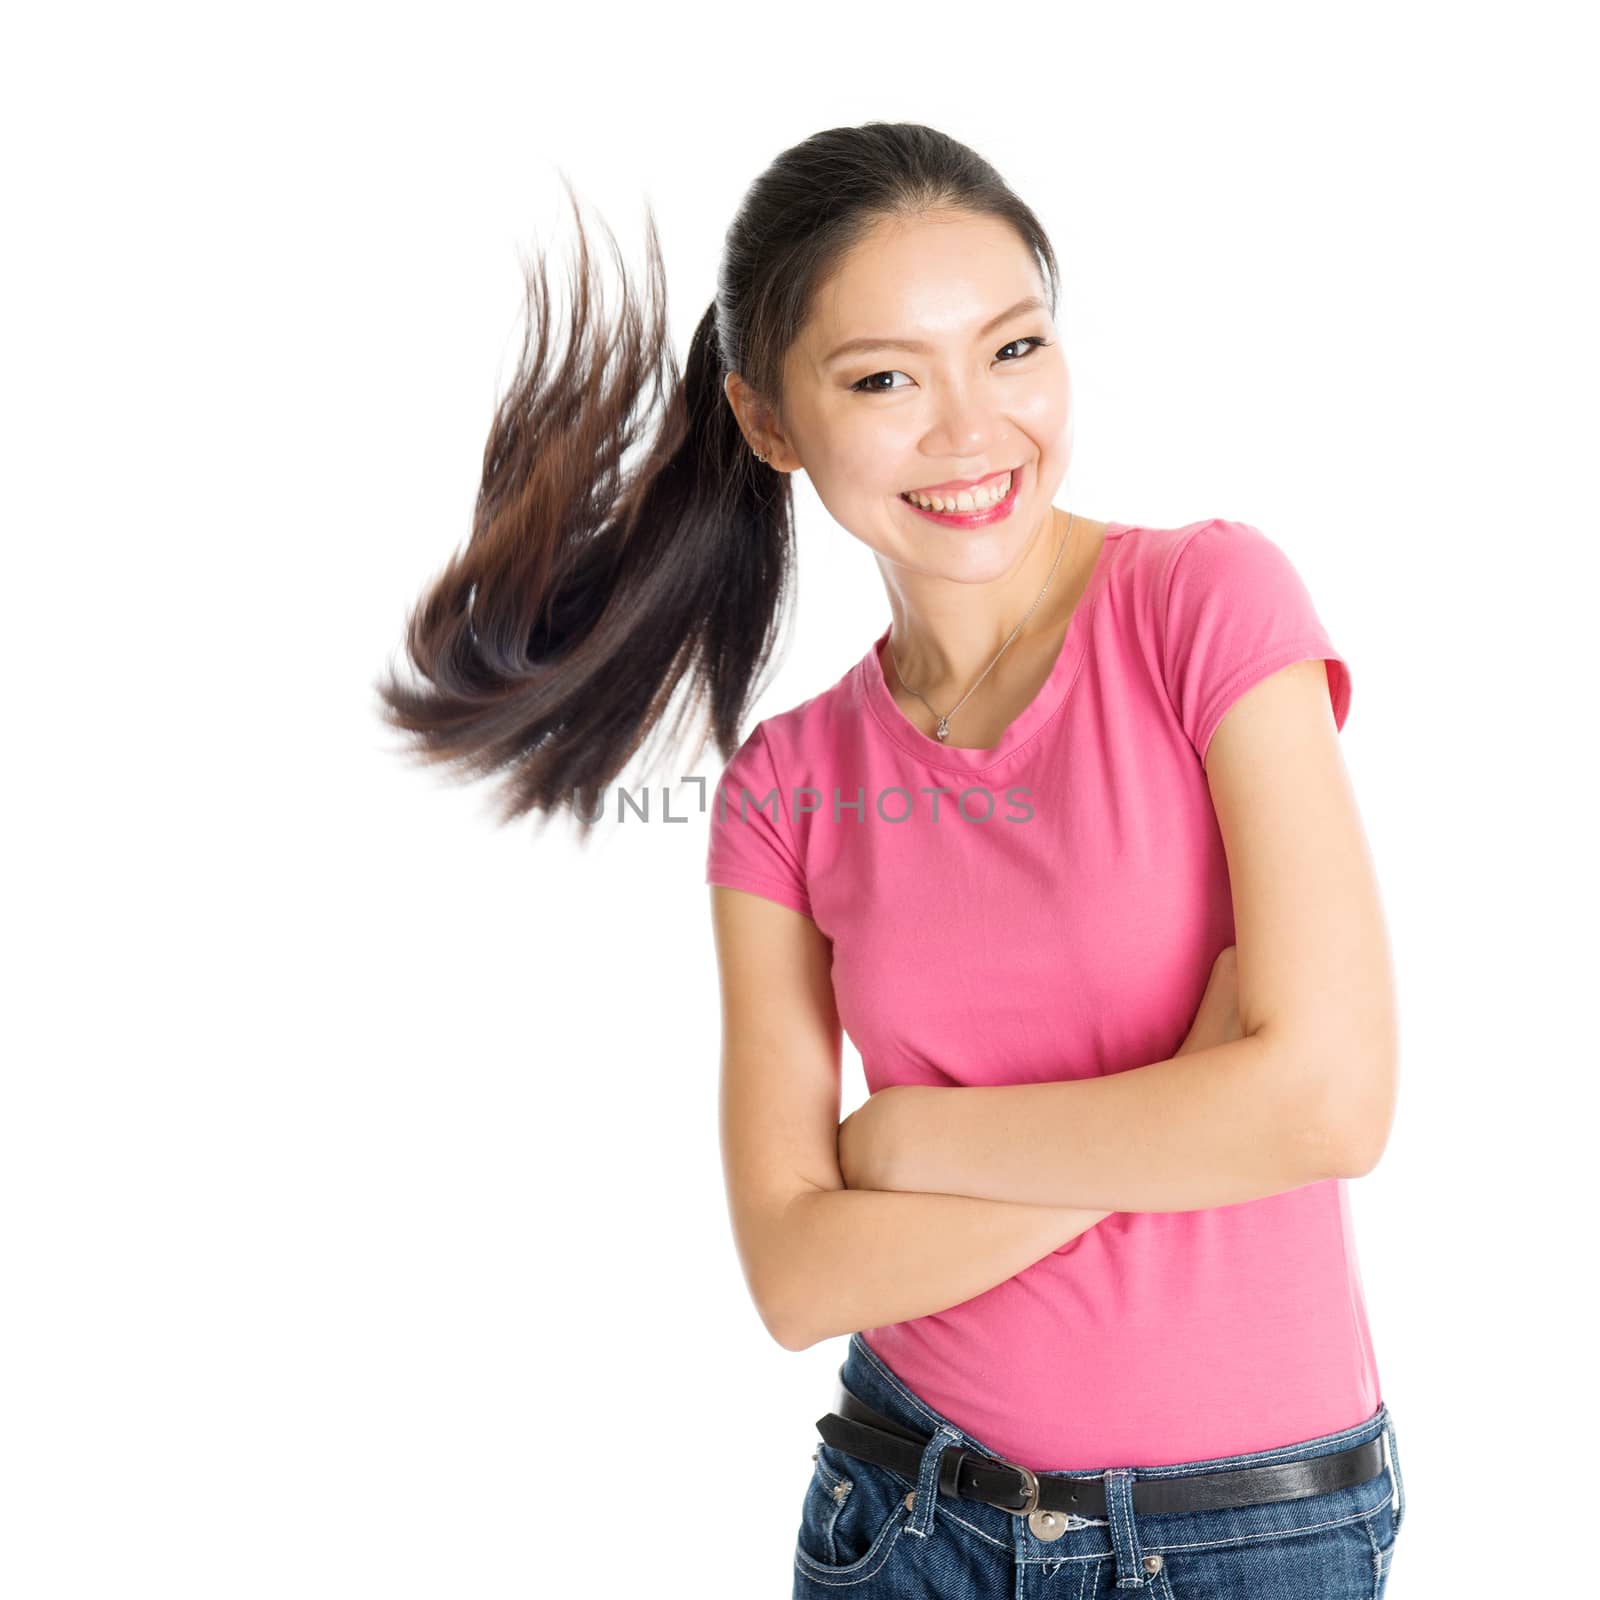 Portrait of happy young Asian woman in pink shirt and jeans with flying ponytail hair, standing isolated on white background.